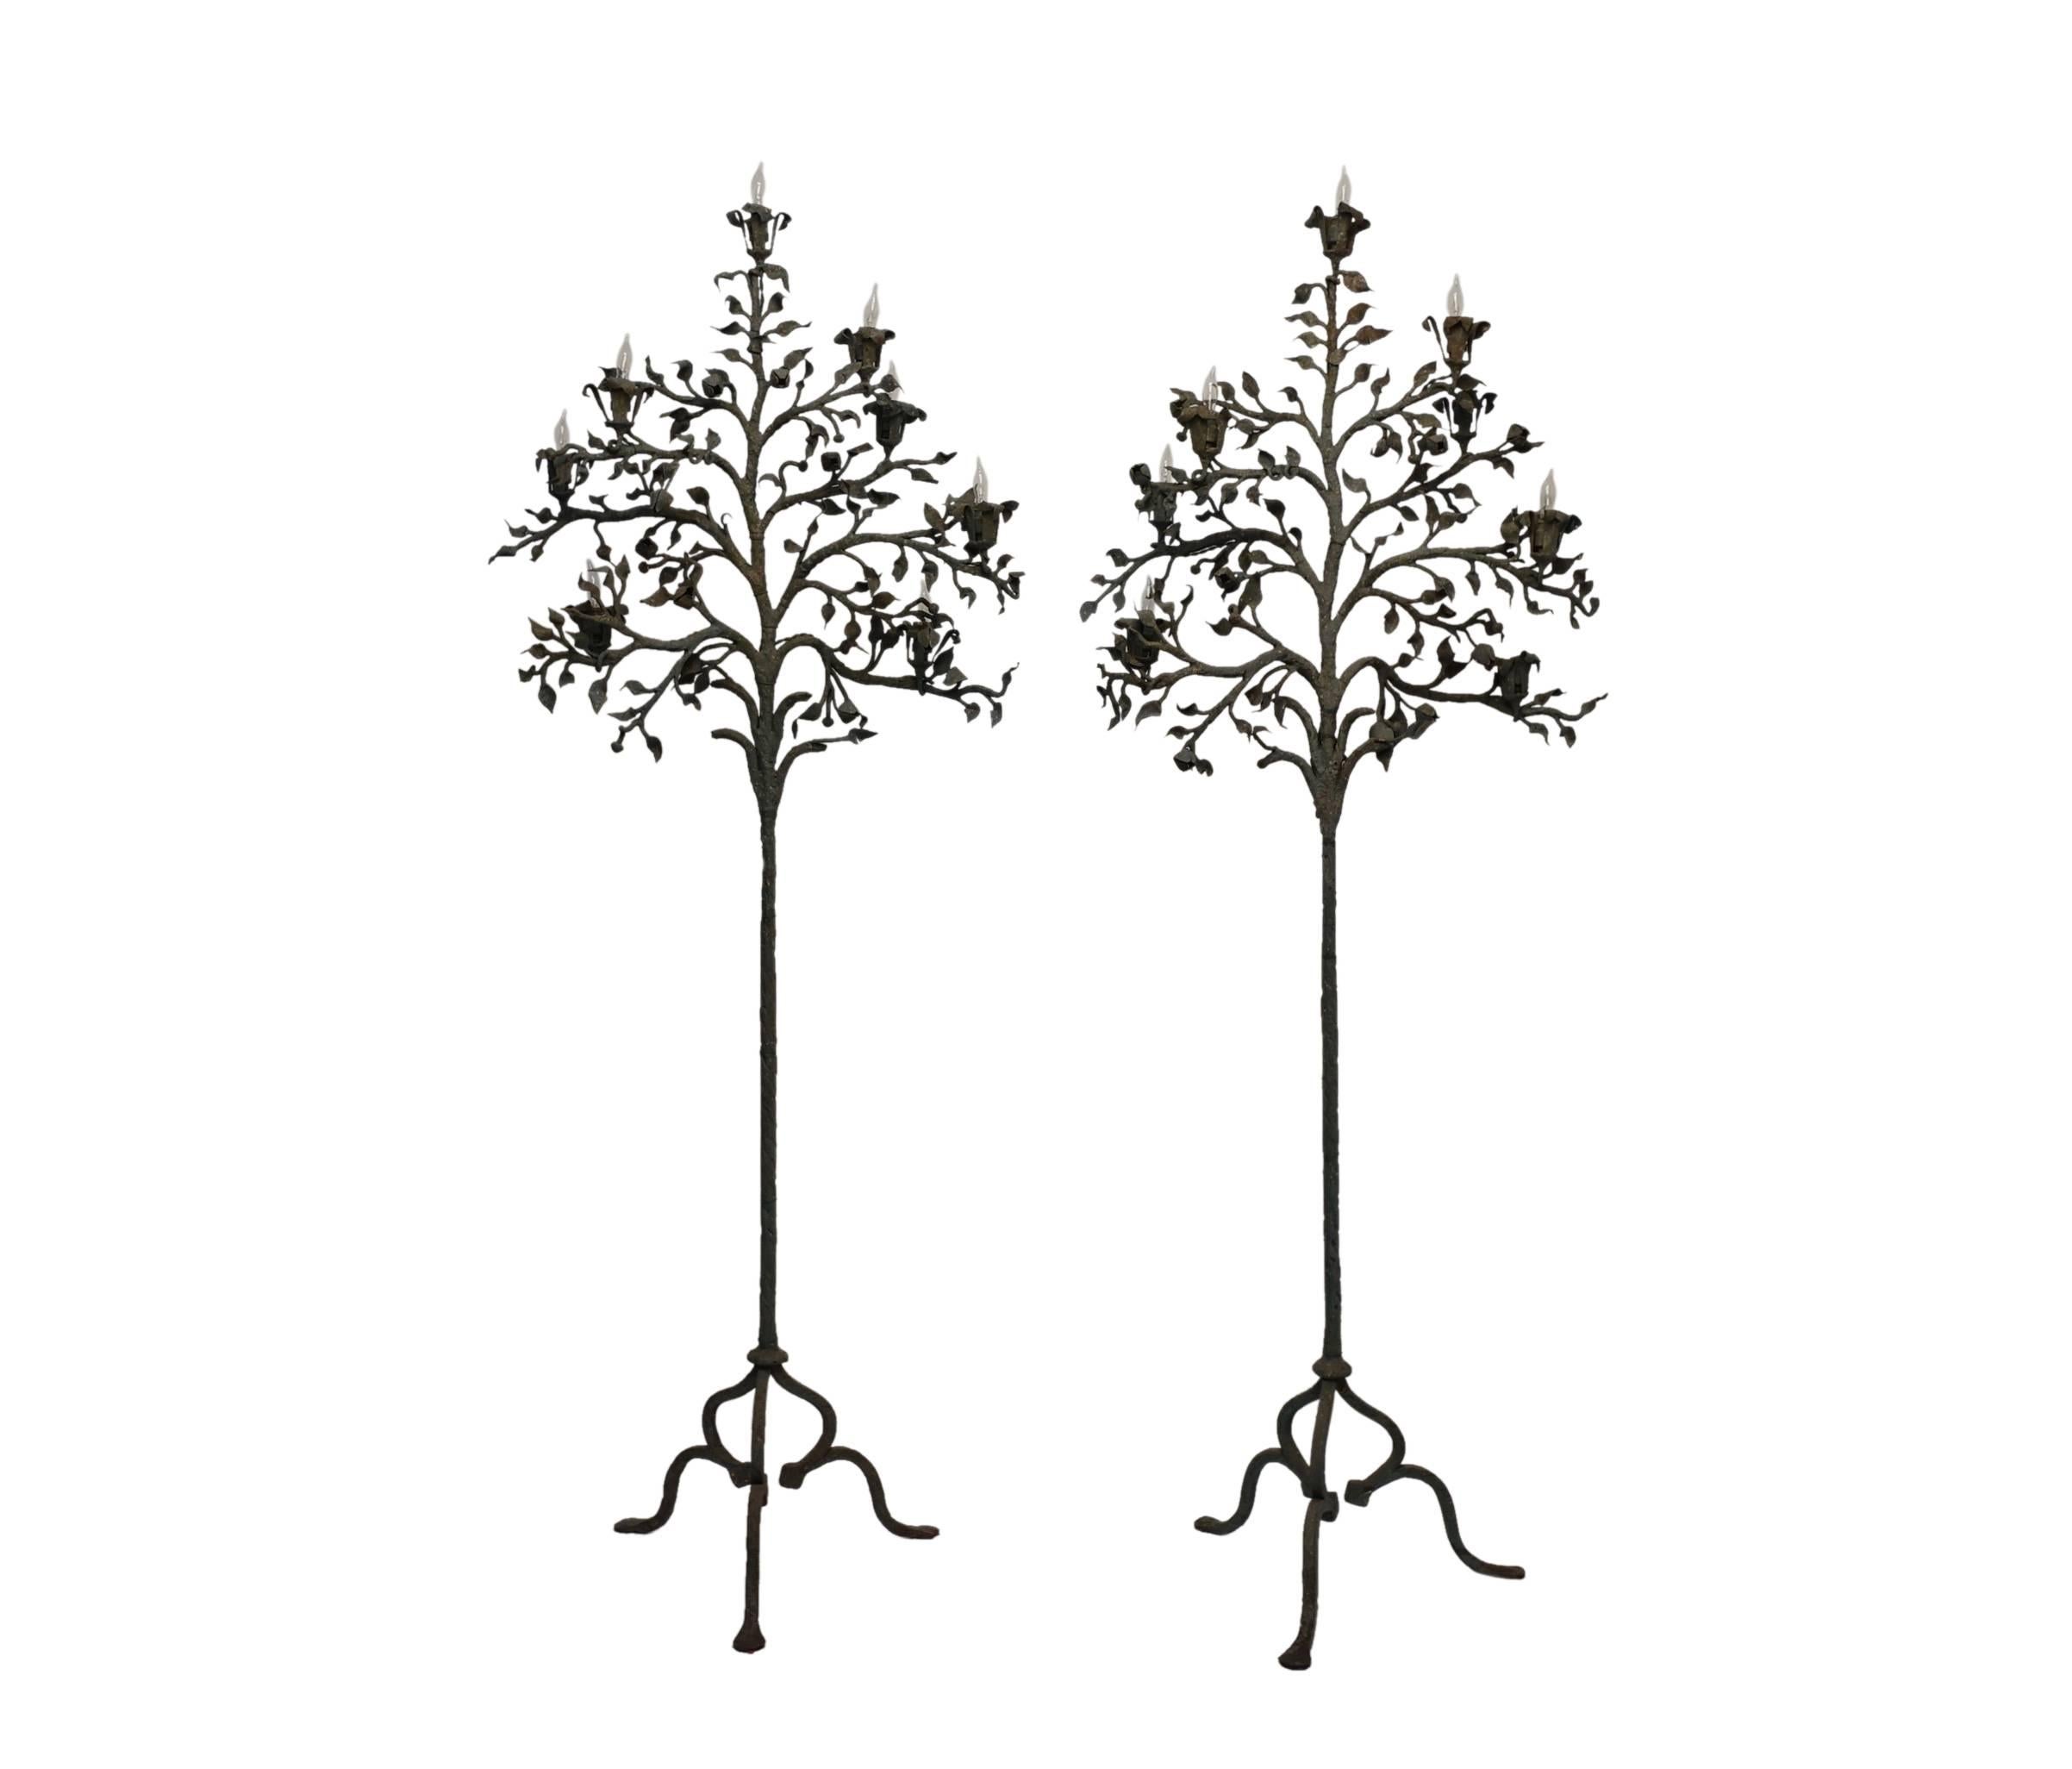 Italian Pair of Wrought Iron Tree Form Torchiere Floor Lamps, Italy, 19th Century